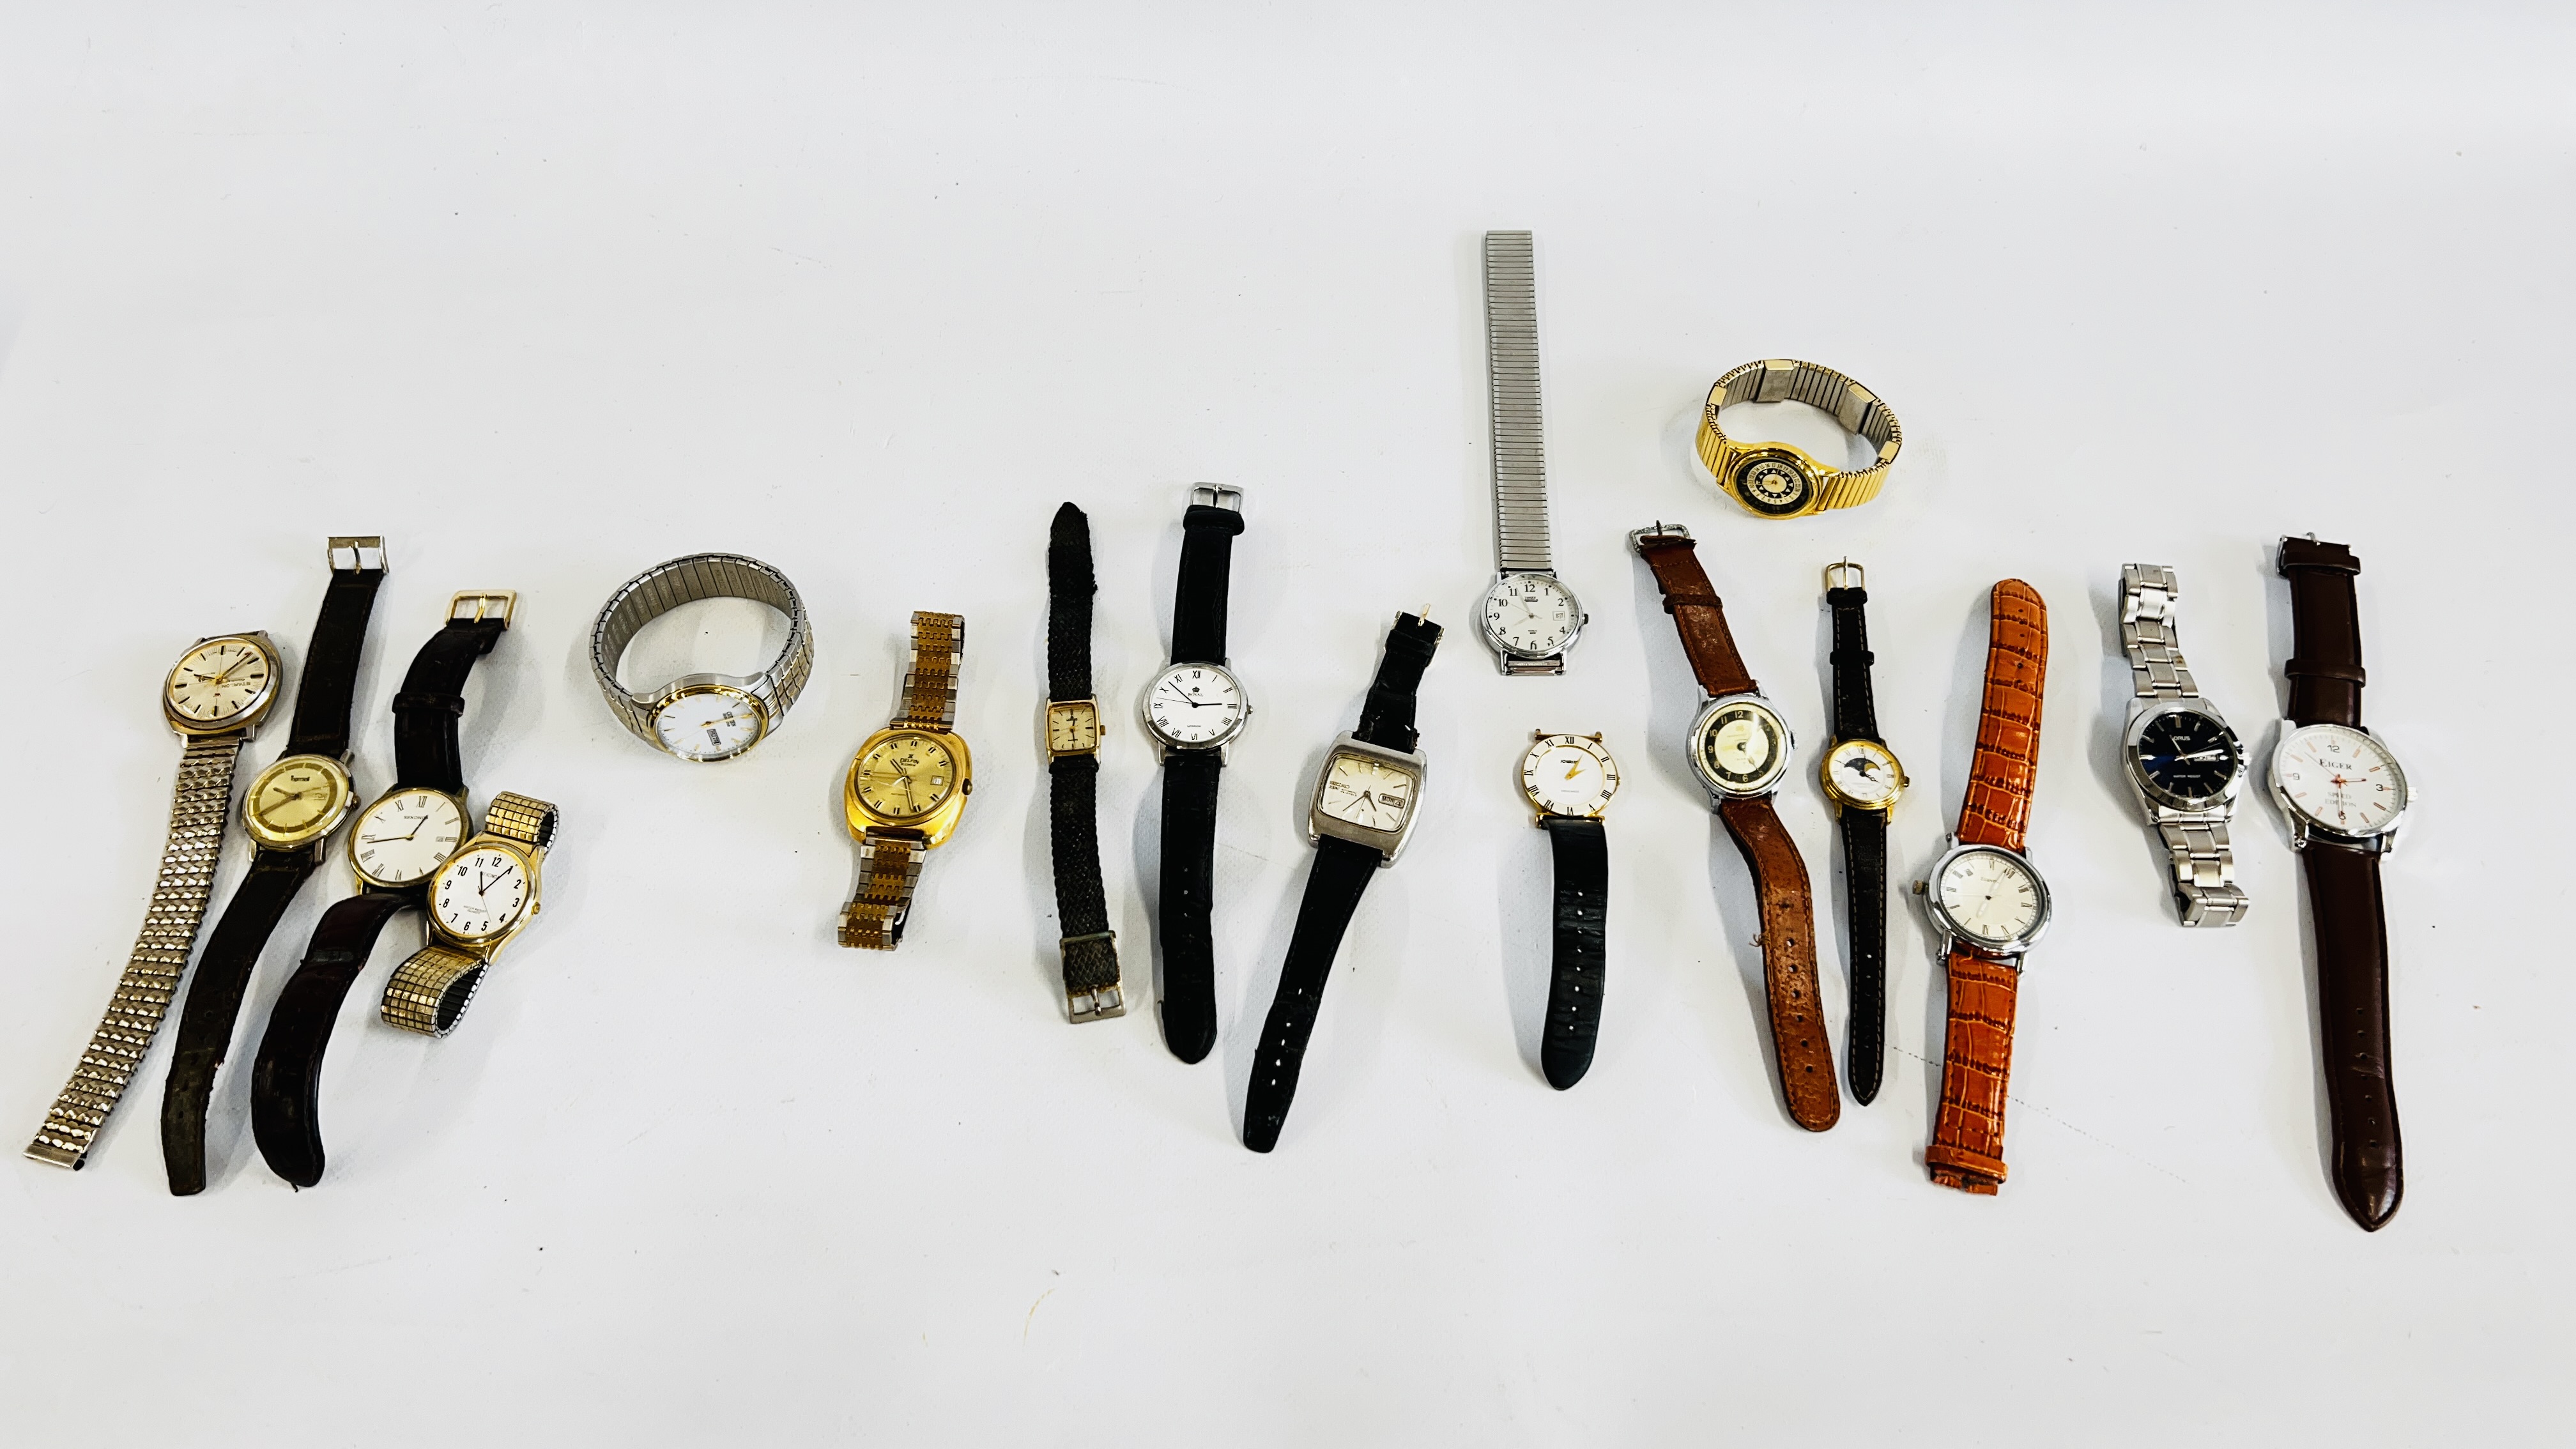 GROUP OF 17 GENT'S WRIST WATCHES TO INCLUDE SEIKO, SEKONDA, CITIZEN ECO DRIVE ETC.